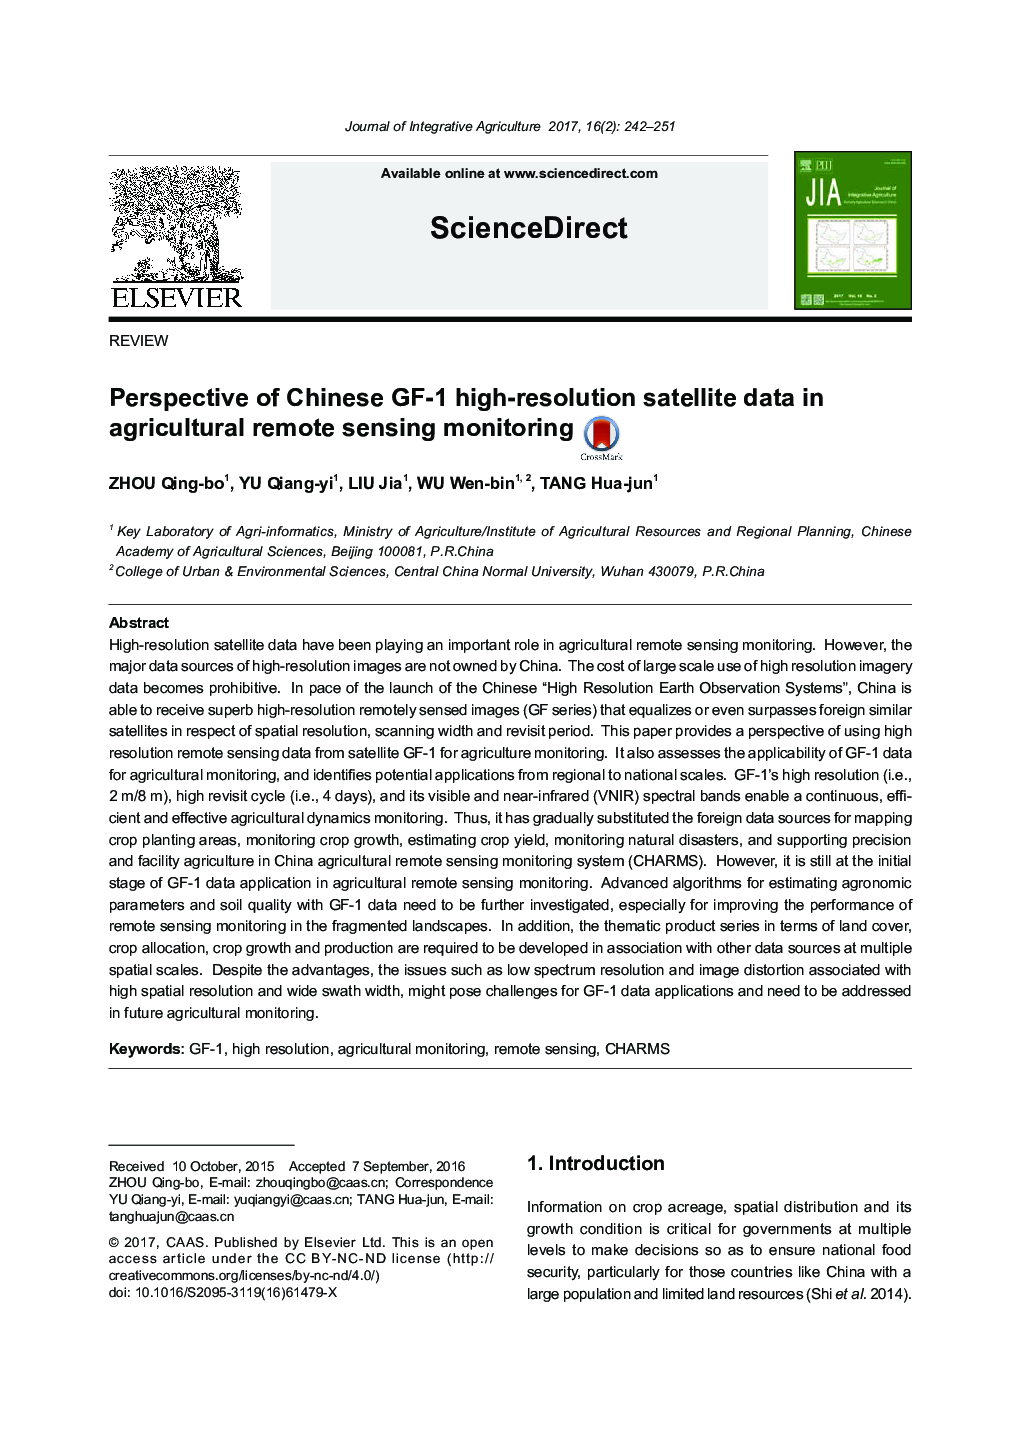 Perspective of Chinese GF-1 high-resolution satellite data in agricultural remote sensing monitoring